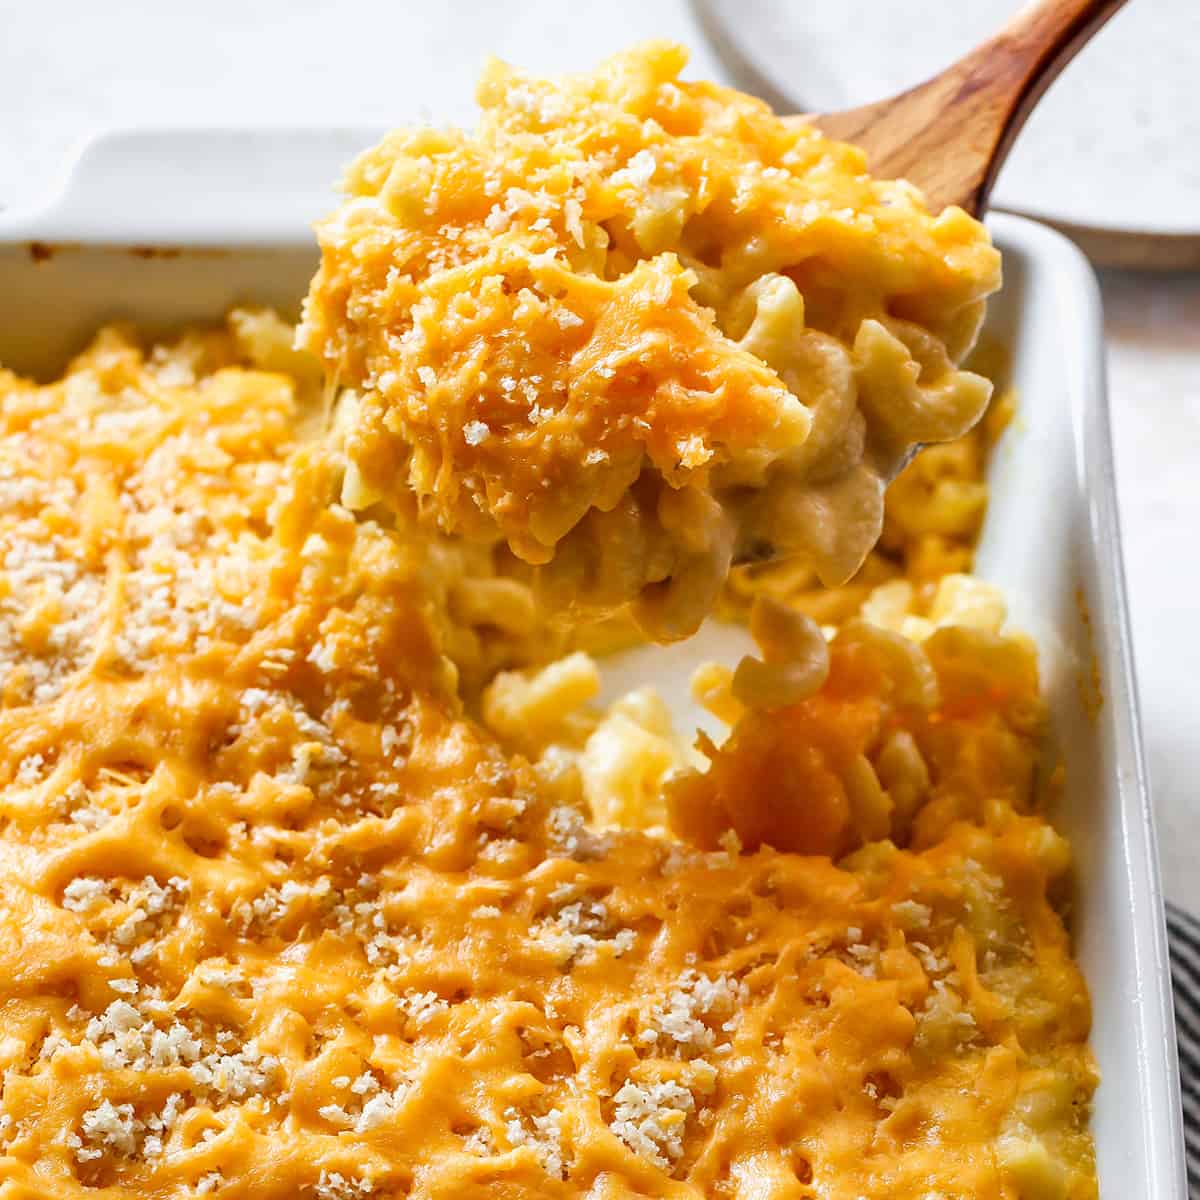 up close view of a wooden spoon scooping Baked Macaroni and Cheese out of a white baking dish